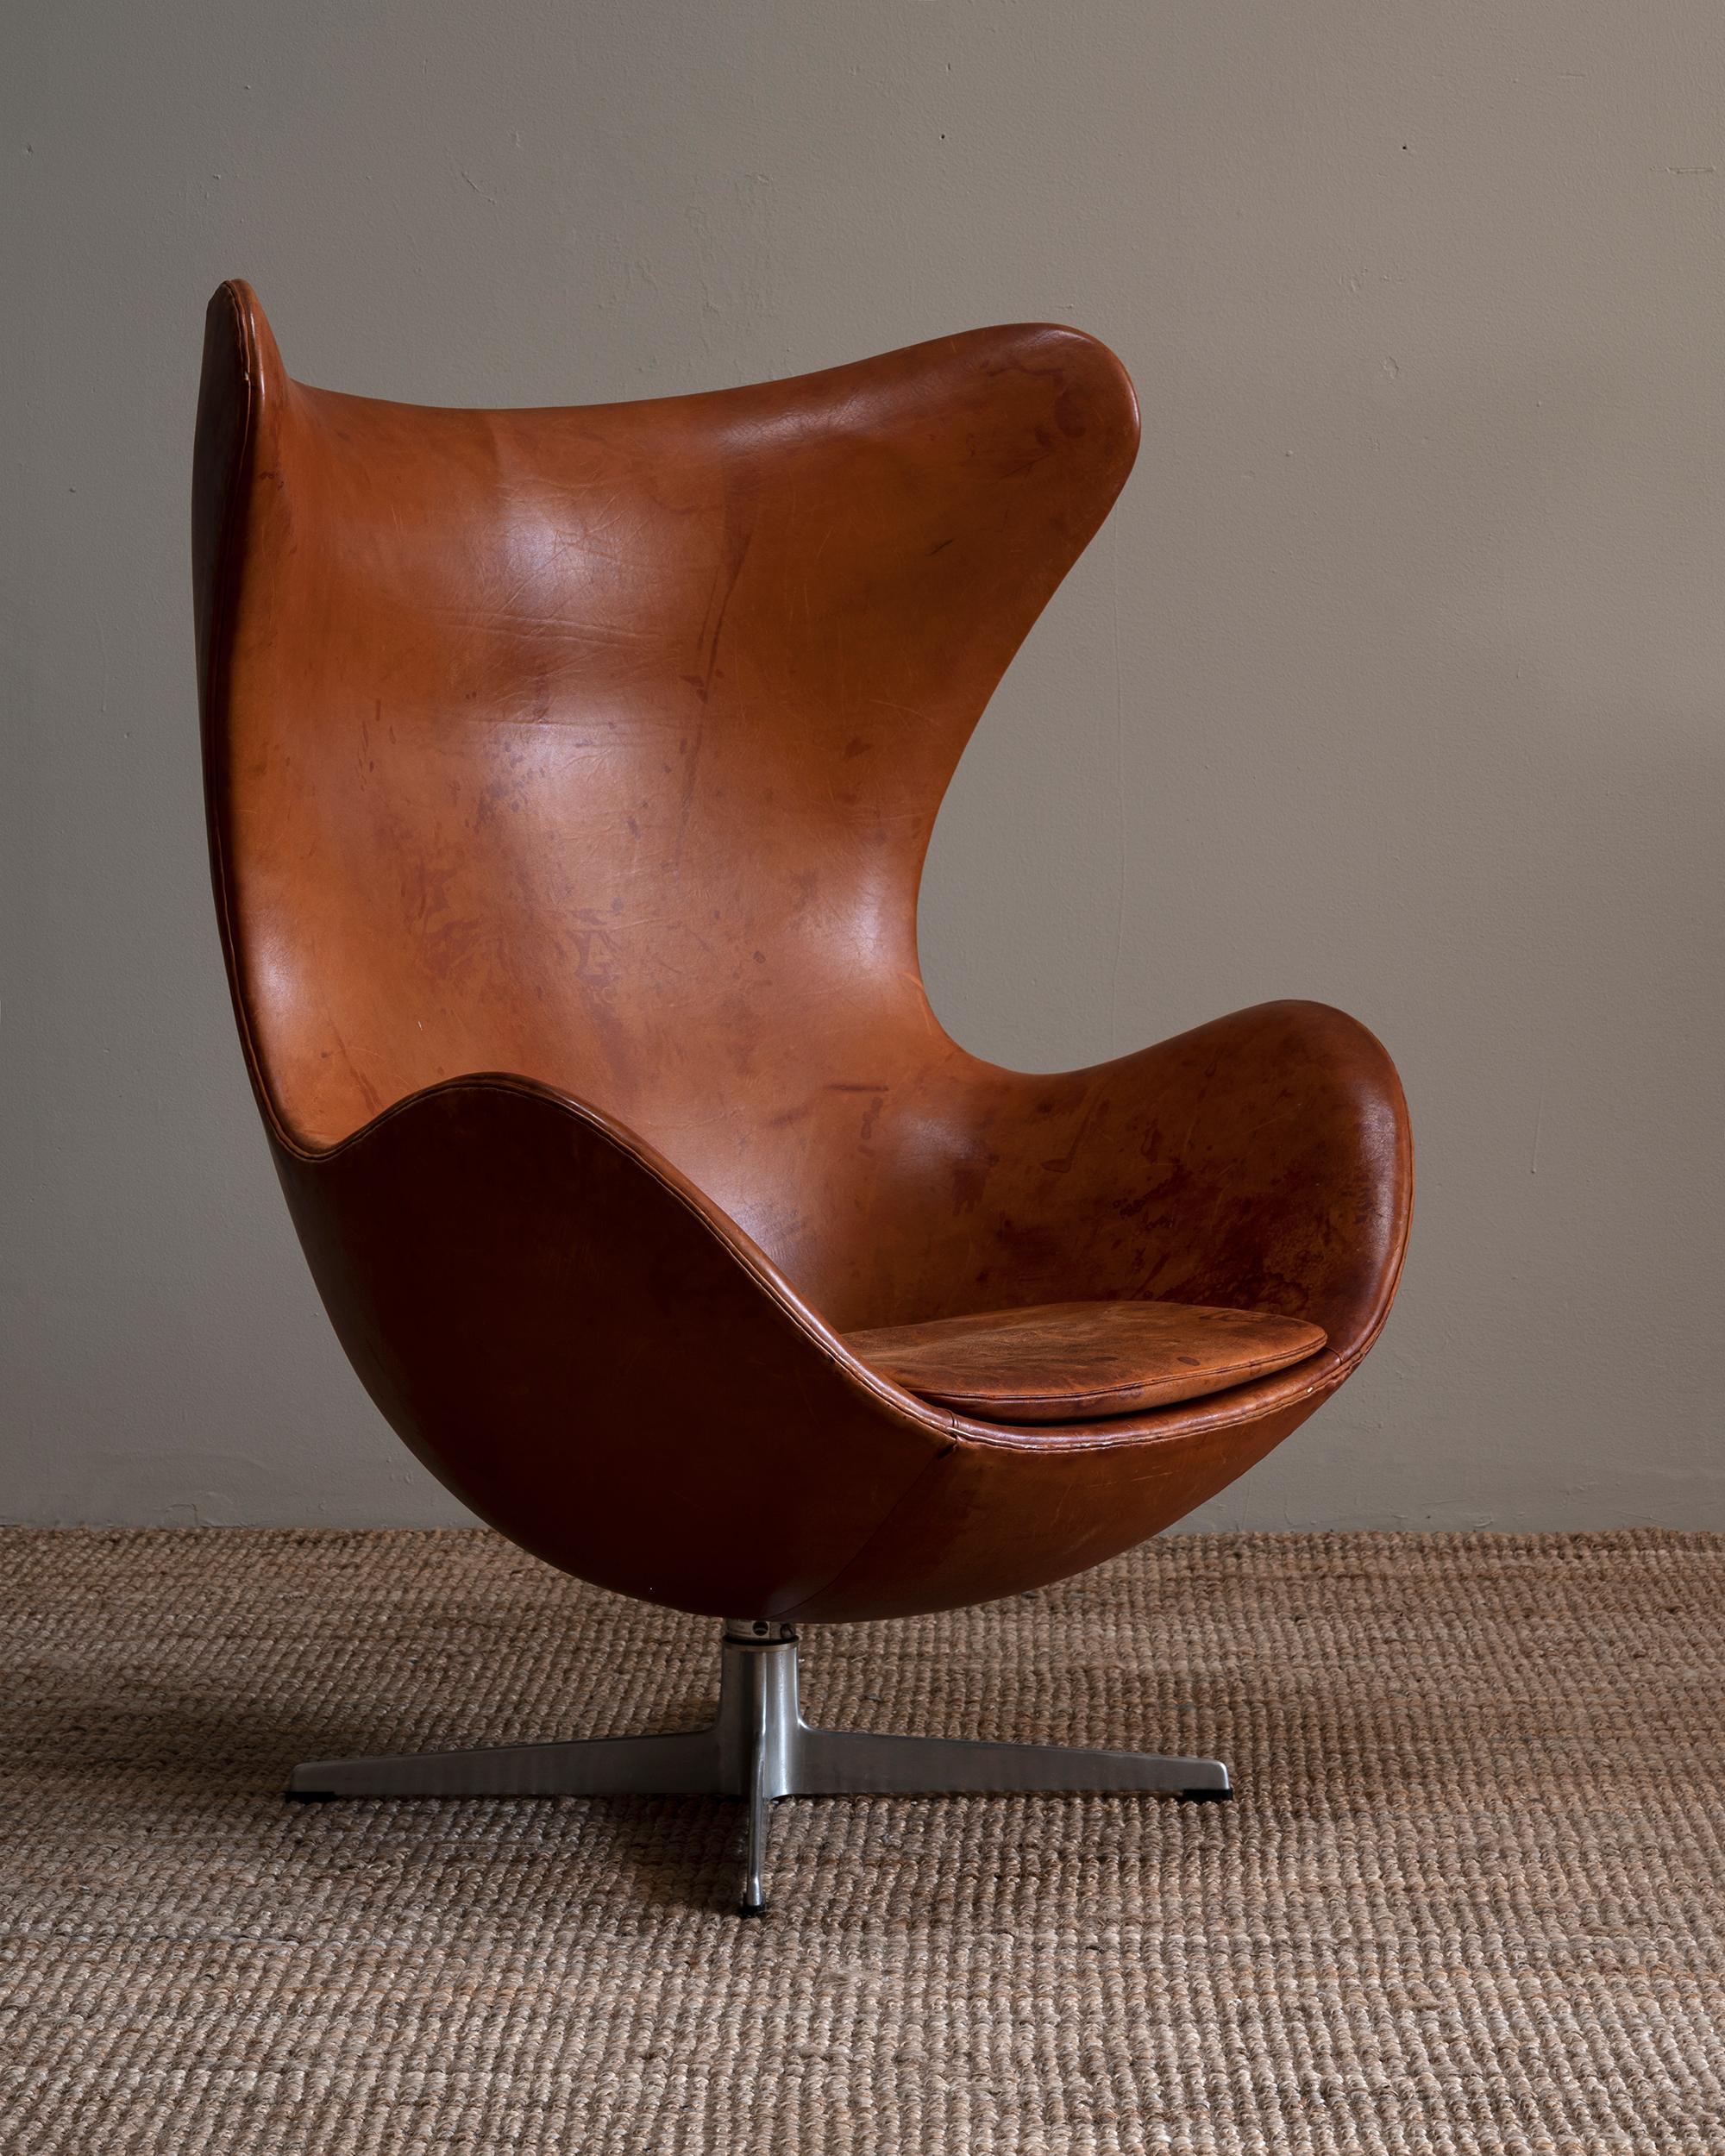 The classic and iconic 'Egg' chair designed by Arne Jacobsen for Fritz Hansen, Denmark, 1958. With its original cognac brown leather with a great patinated surface. Produced 1960s - 70s. 